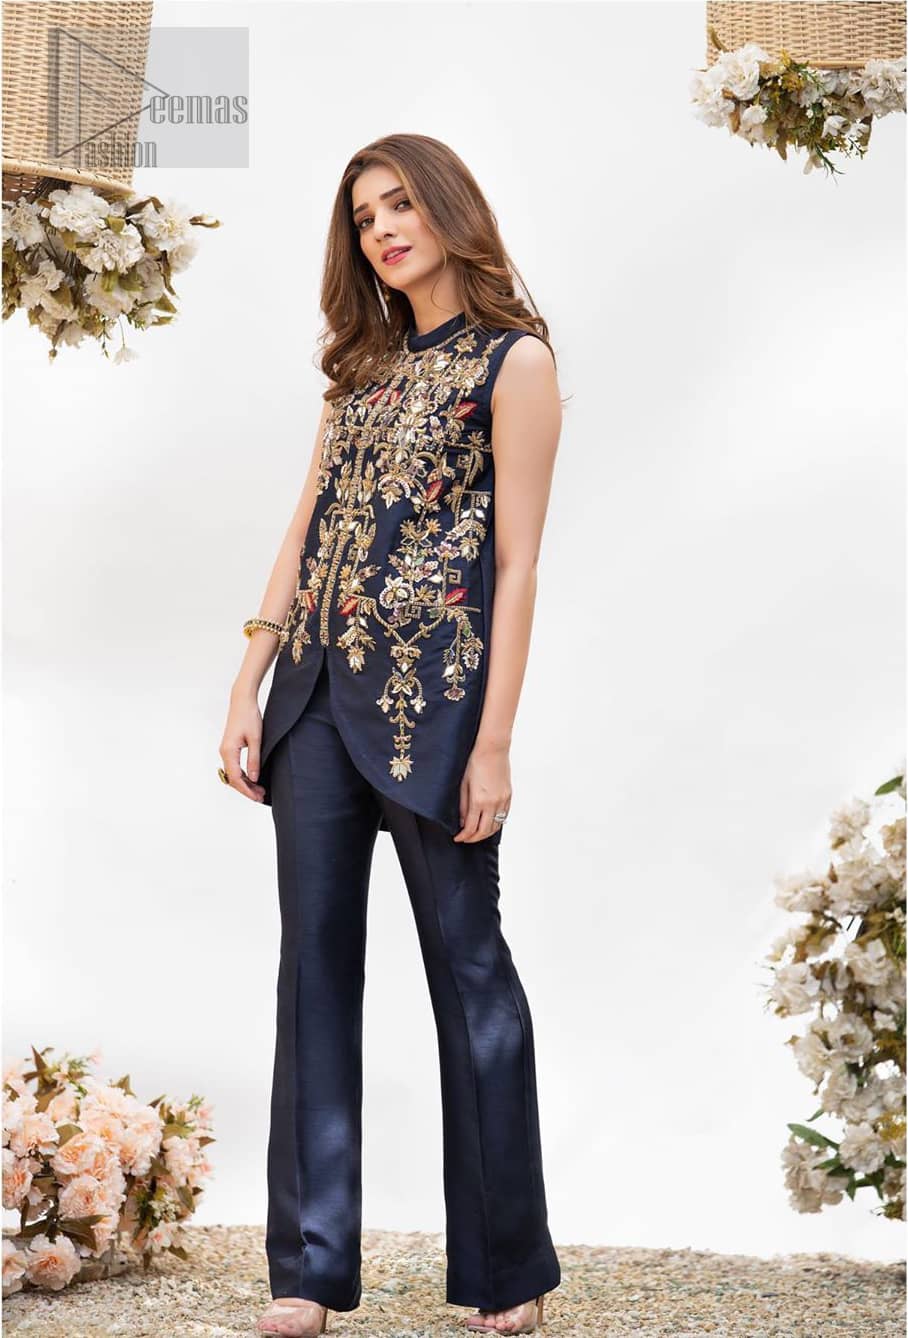 This outfit is timeless beauty. Boost your confidence and style in this glamorous attire accentuated with finest zardozi and thread work. The shirt is delicately handcrafted with golden zarozi work and multiple color thread embroidery. Style it up with navy blue bell bottom pants which complete the look.